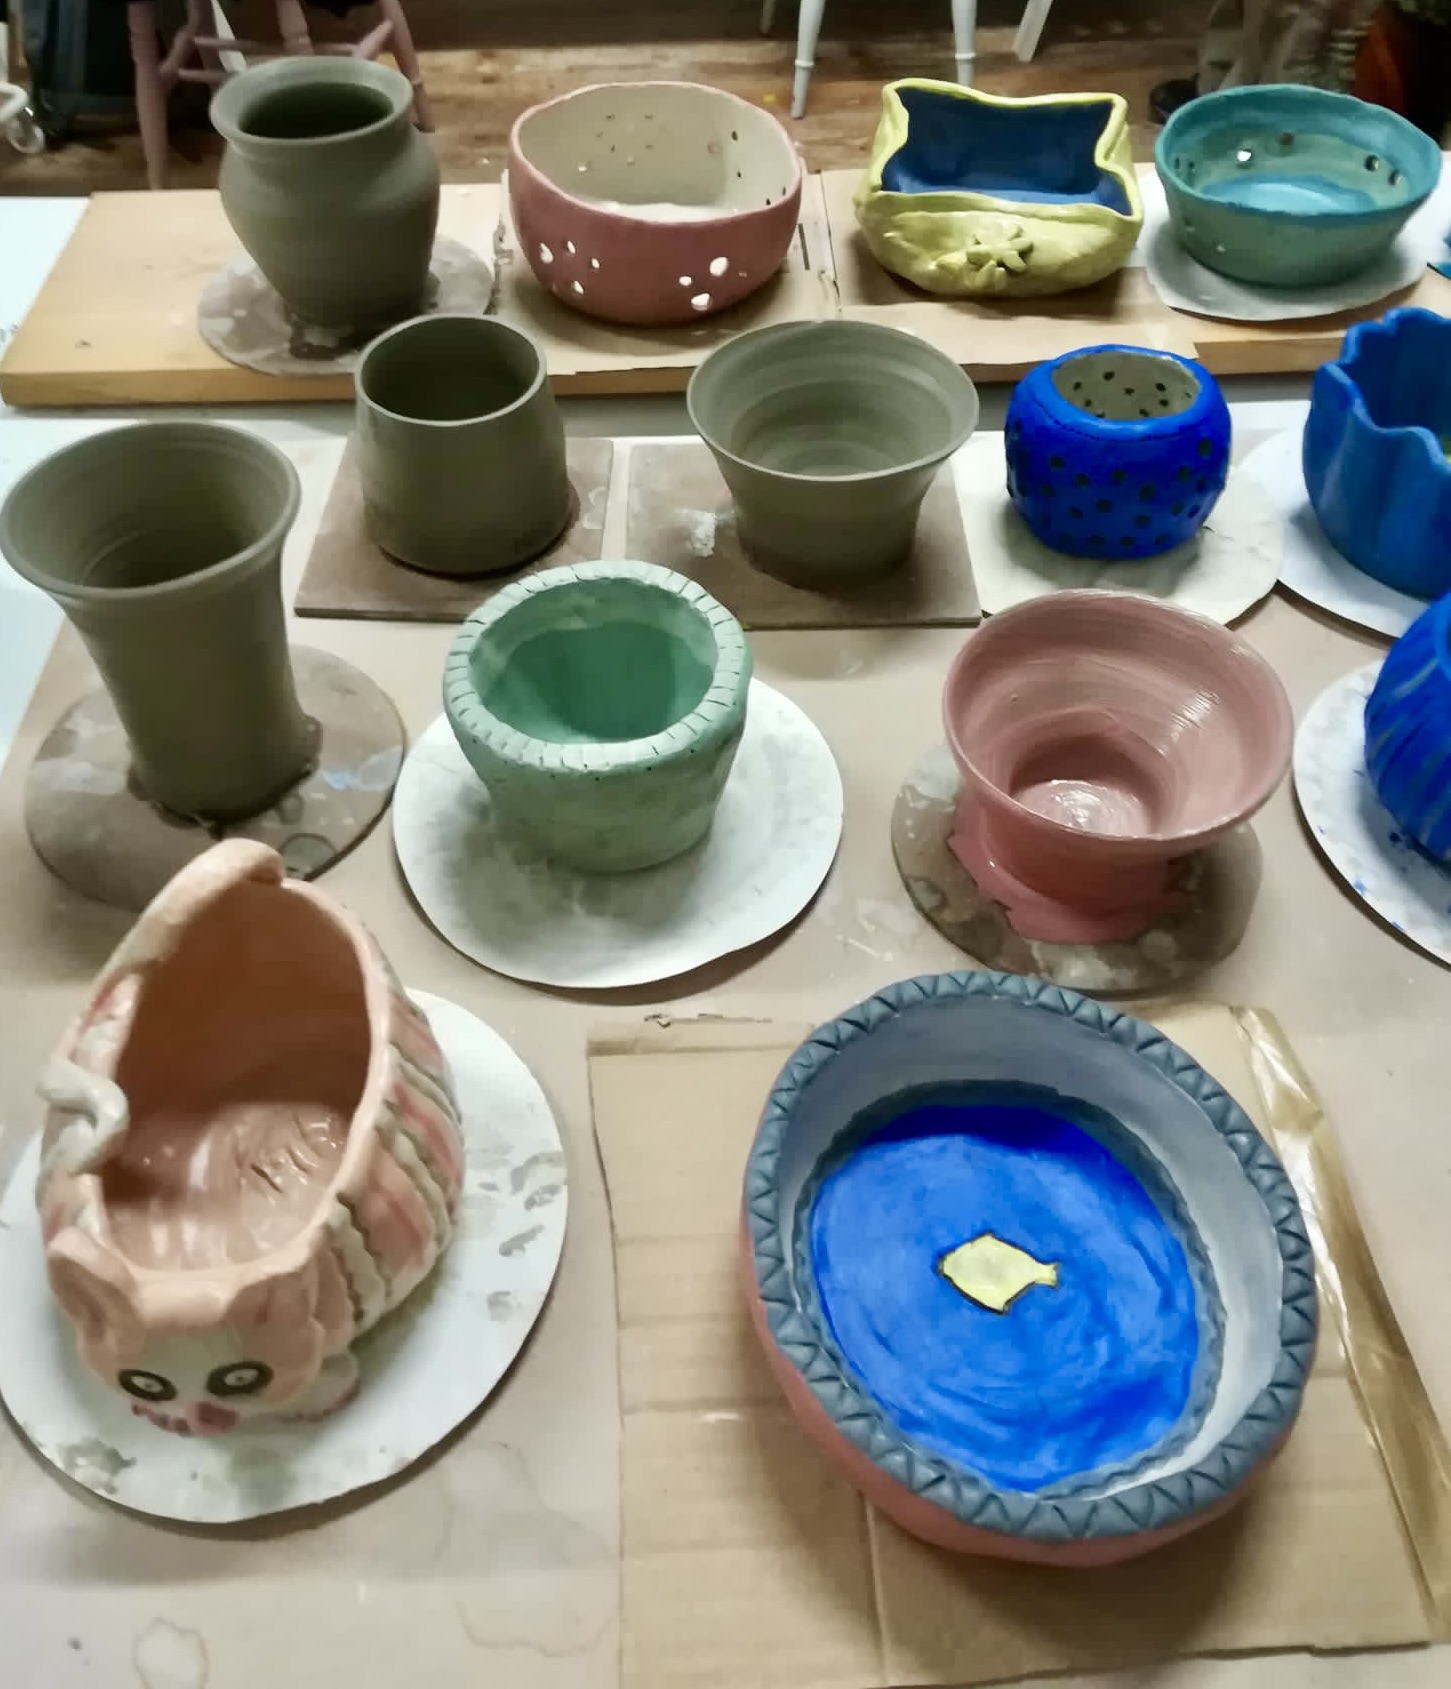 Adult beginner evening classes: "Have Fun With Clay"